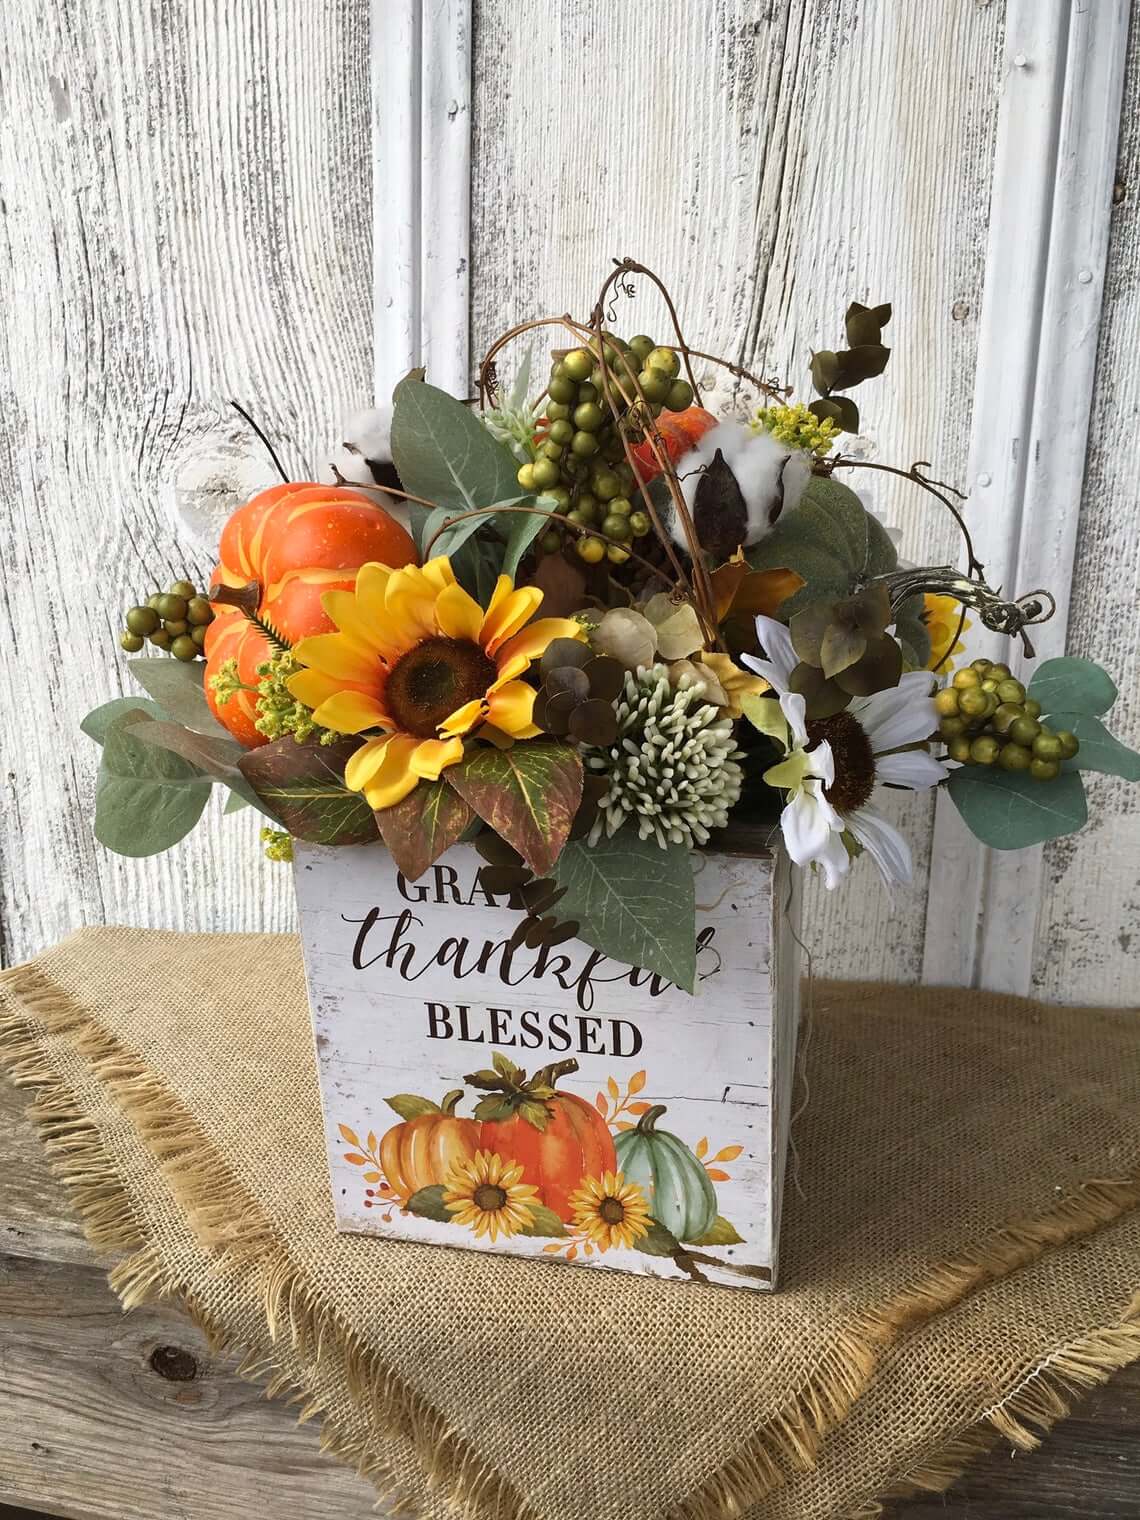 Grateful, Thankful, and Blessed Harvest Box